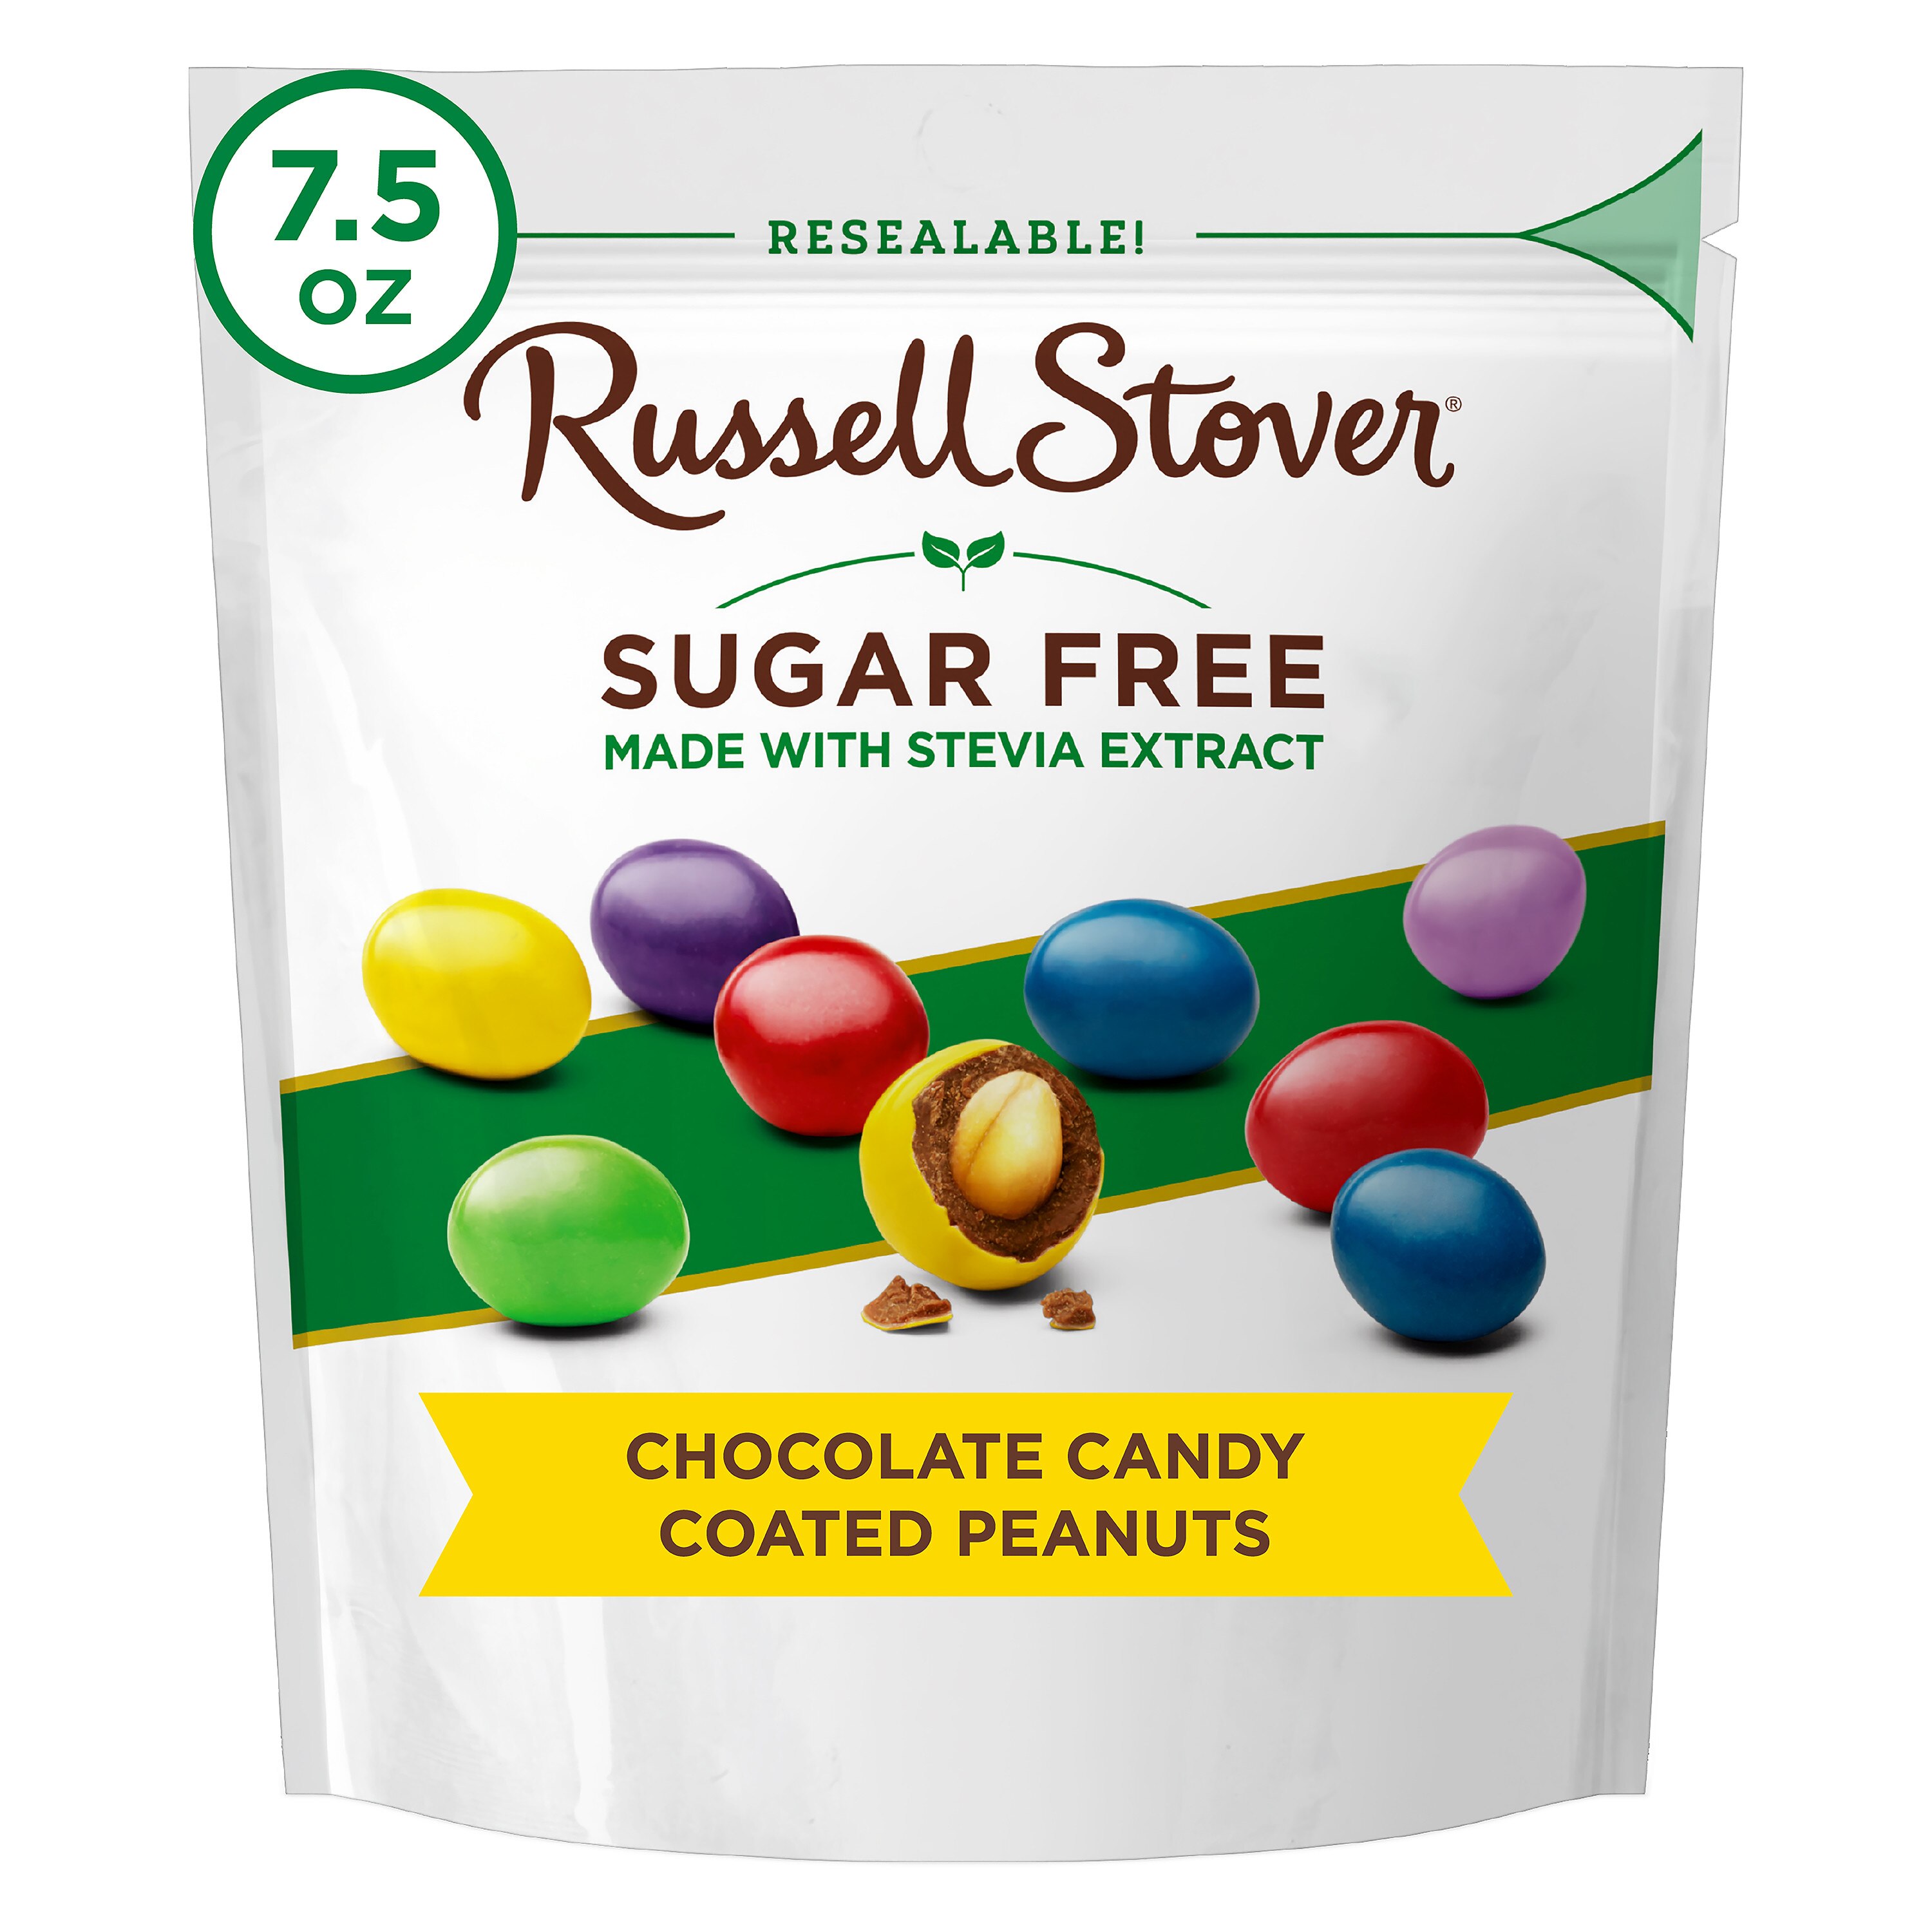 Russell Stover Sugar Free Candy Coated Peanuts, 7.5 Oz , CVS